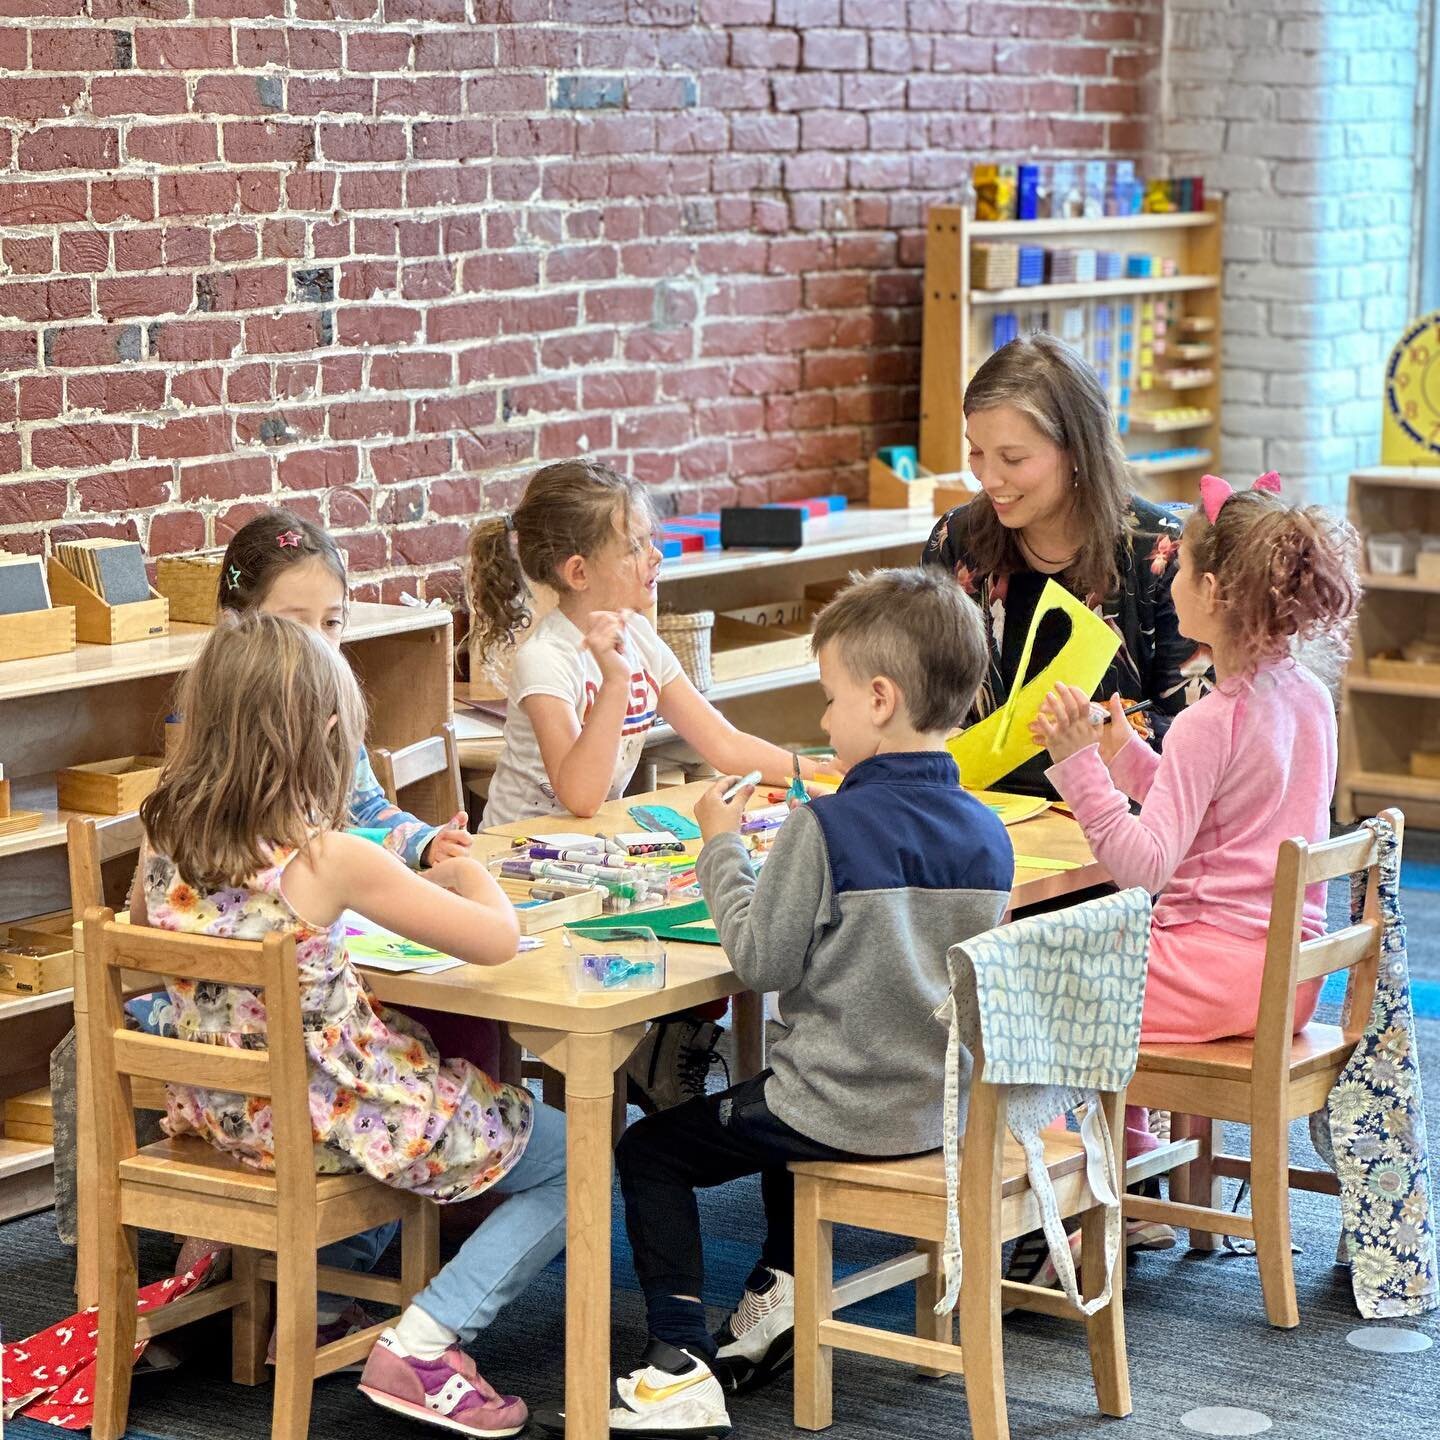 Last week, we kicked off an exciting collaboration with a local organization, Twist Hearts (@twistoutcancer)! Little City kindergartners participated in an art workshop led by Art Therapist and Licensed Professional Counselor, Michaela Herr Hlubik. 
